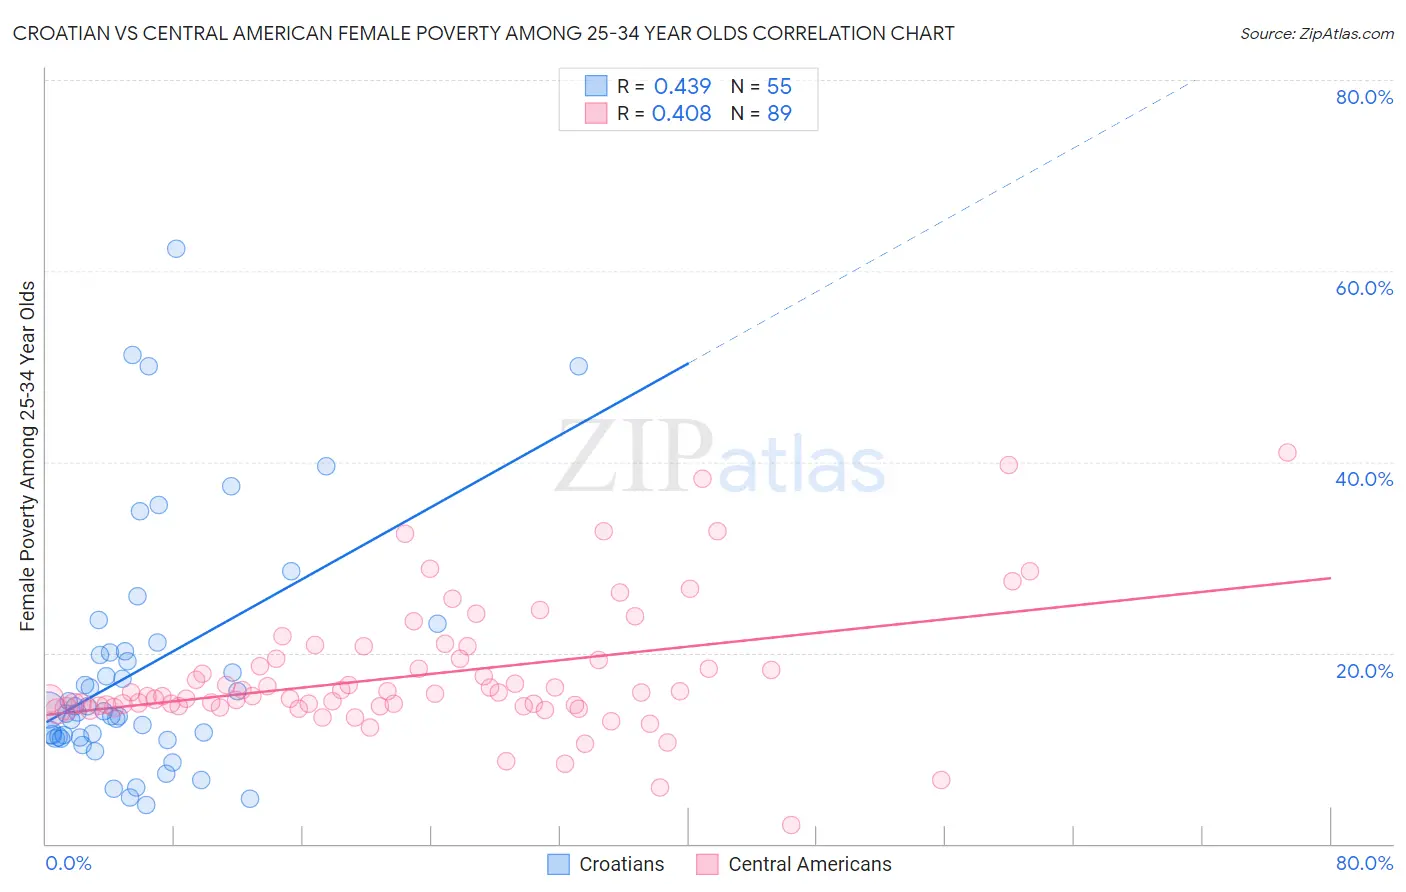 Croatian vs Central American Female Poverty Among 25-34 Year Olds